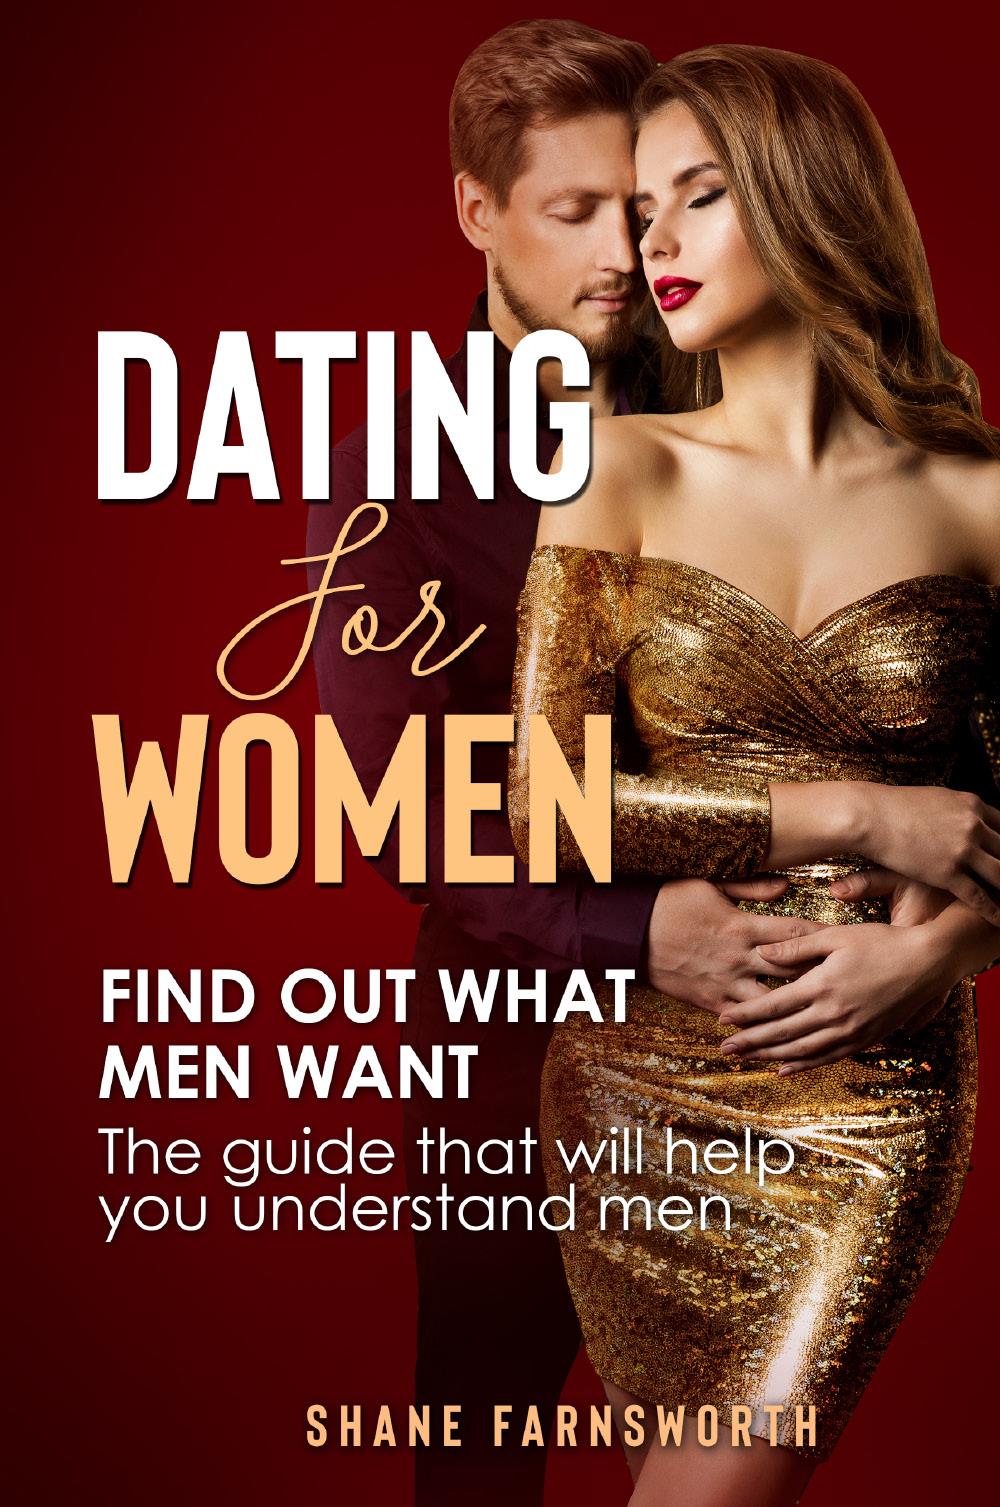 Dating for women. Find out what men want. The guide that will help you understand men.